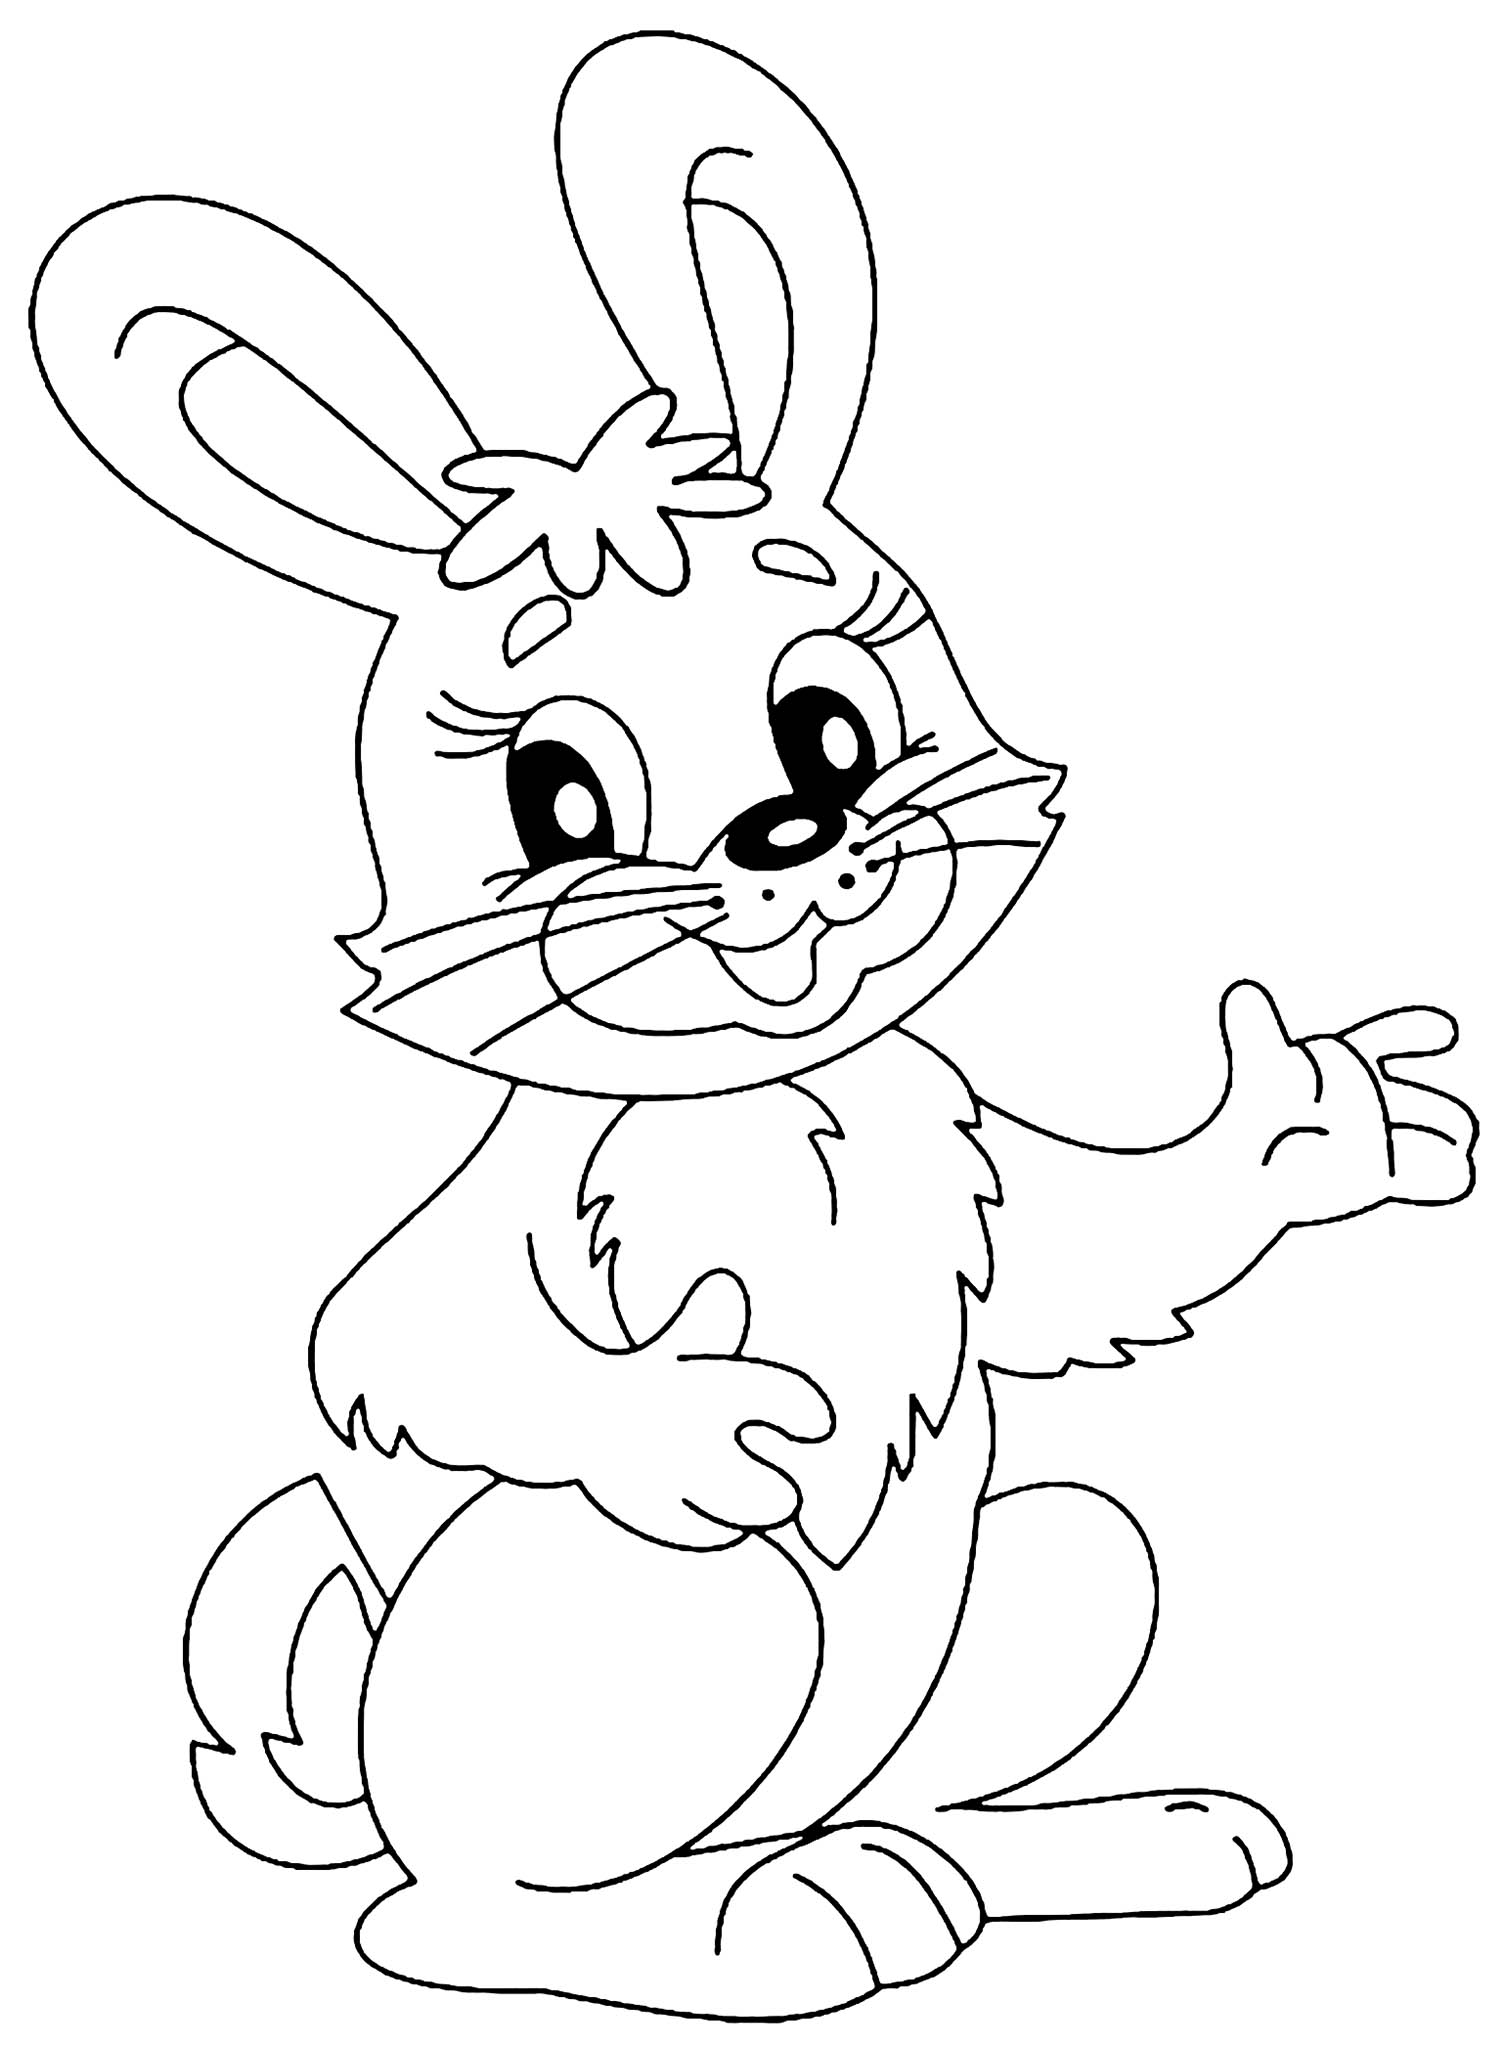 Rabbit to color for children Rabbit Kids Coloring Pages